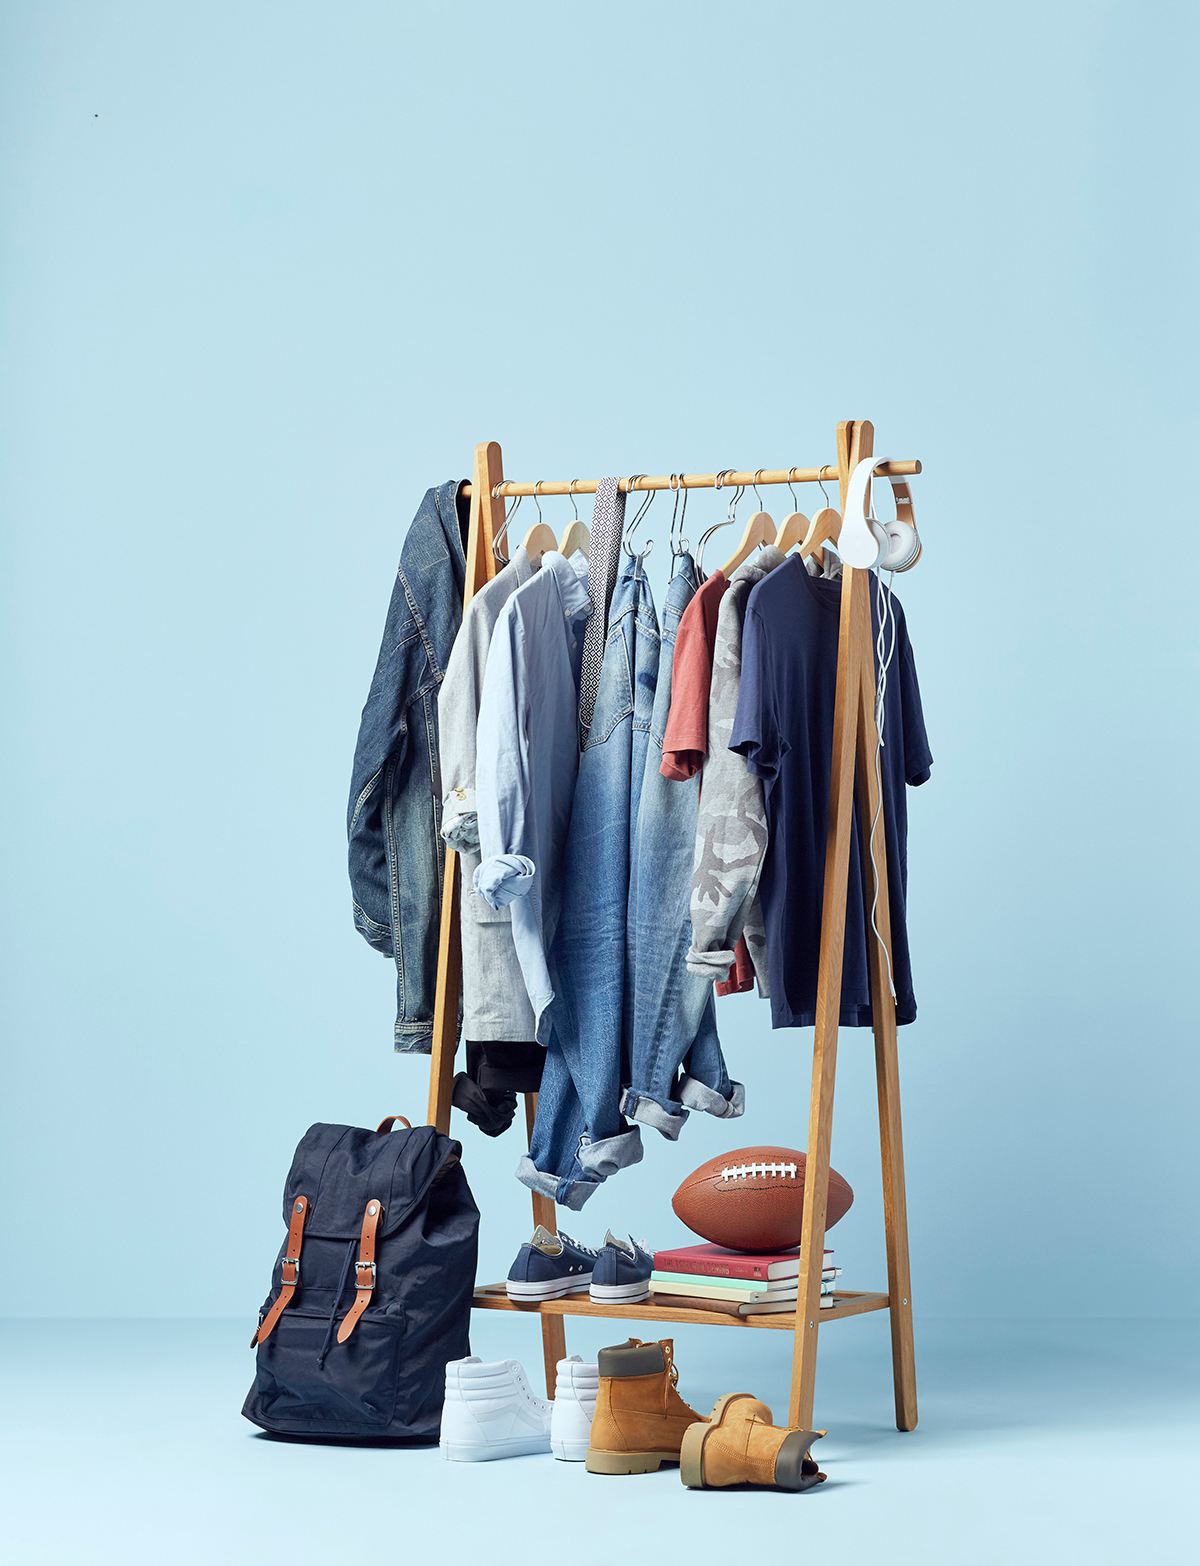 Clothing rack with cloths